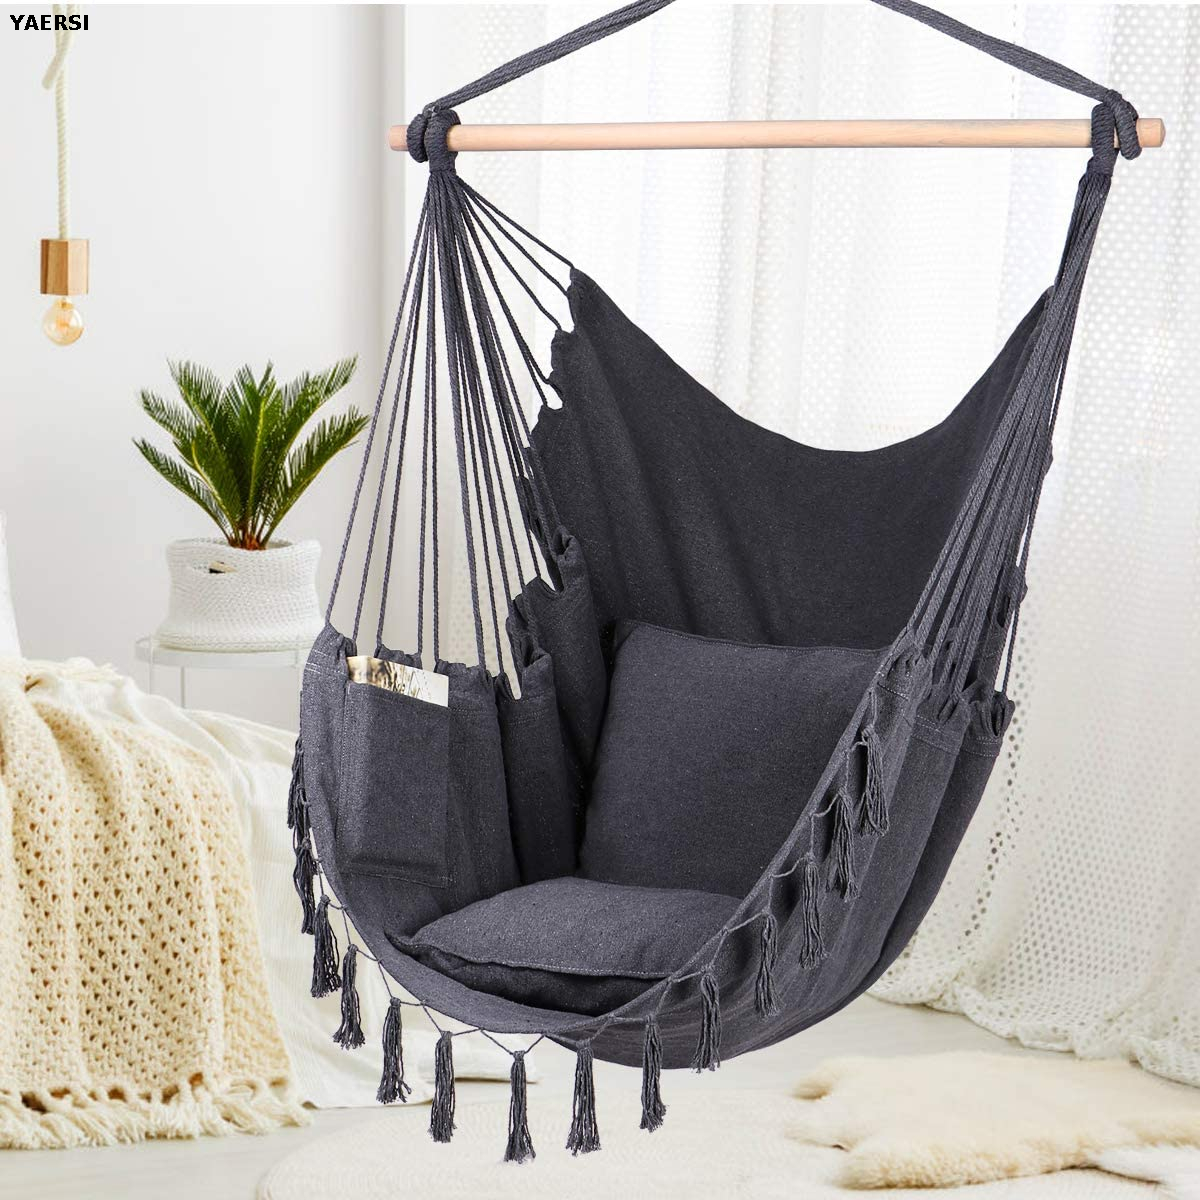 Hammock chair with Two Cushions